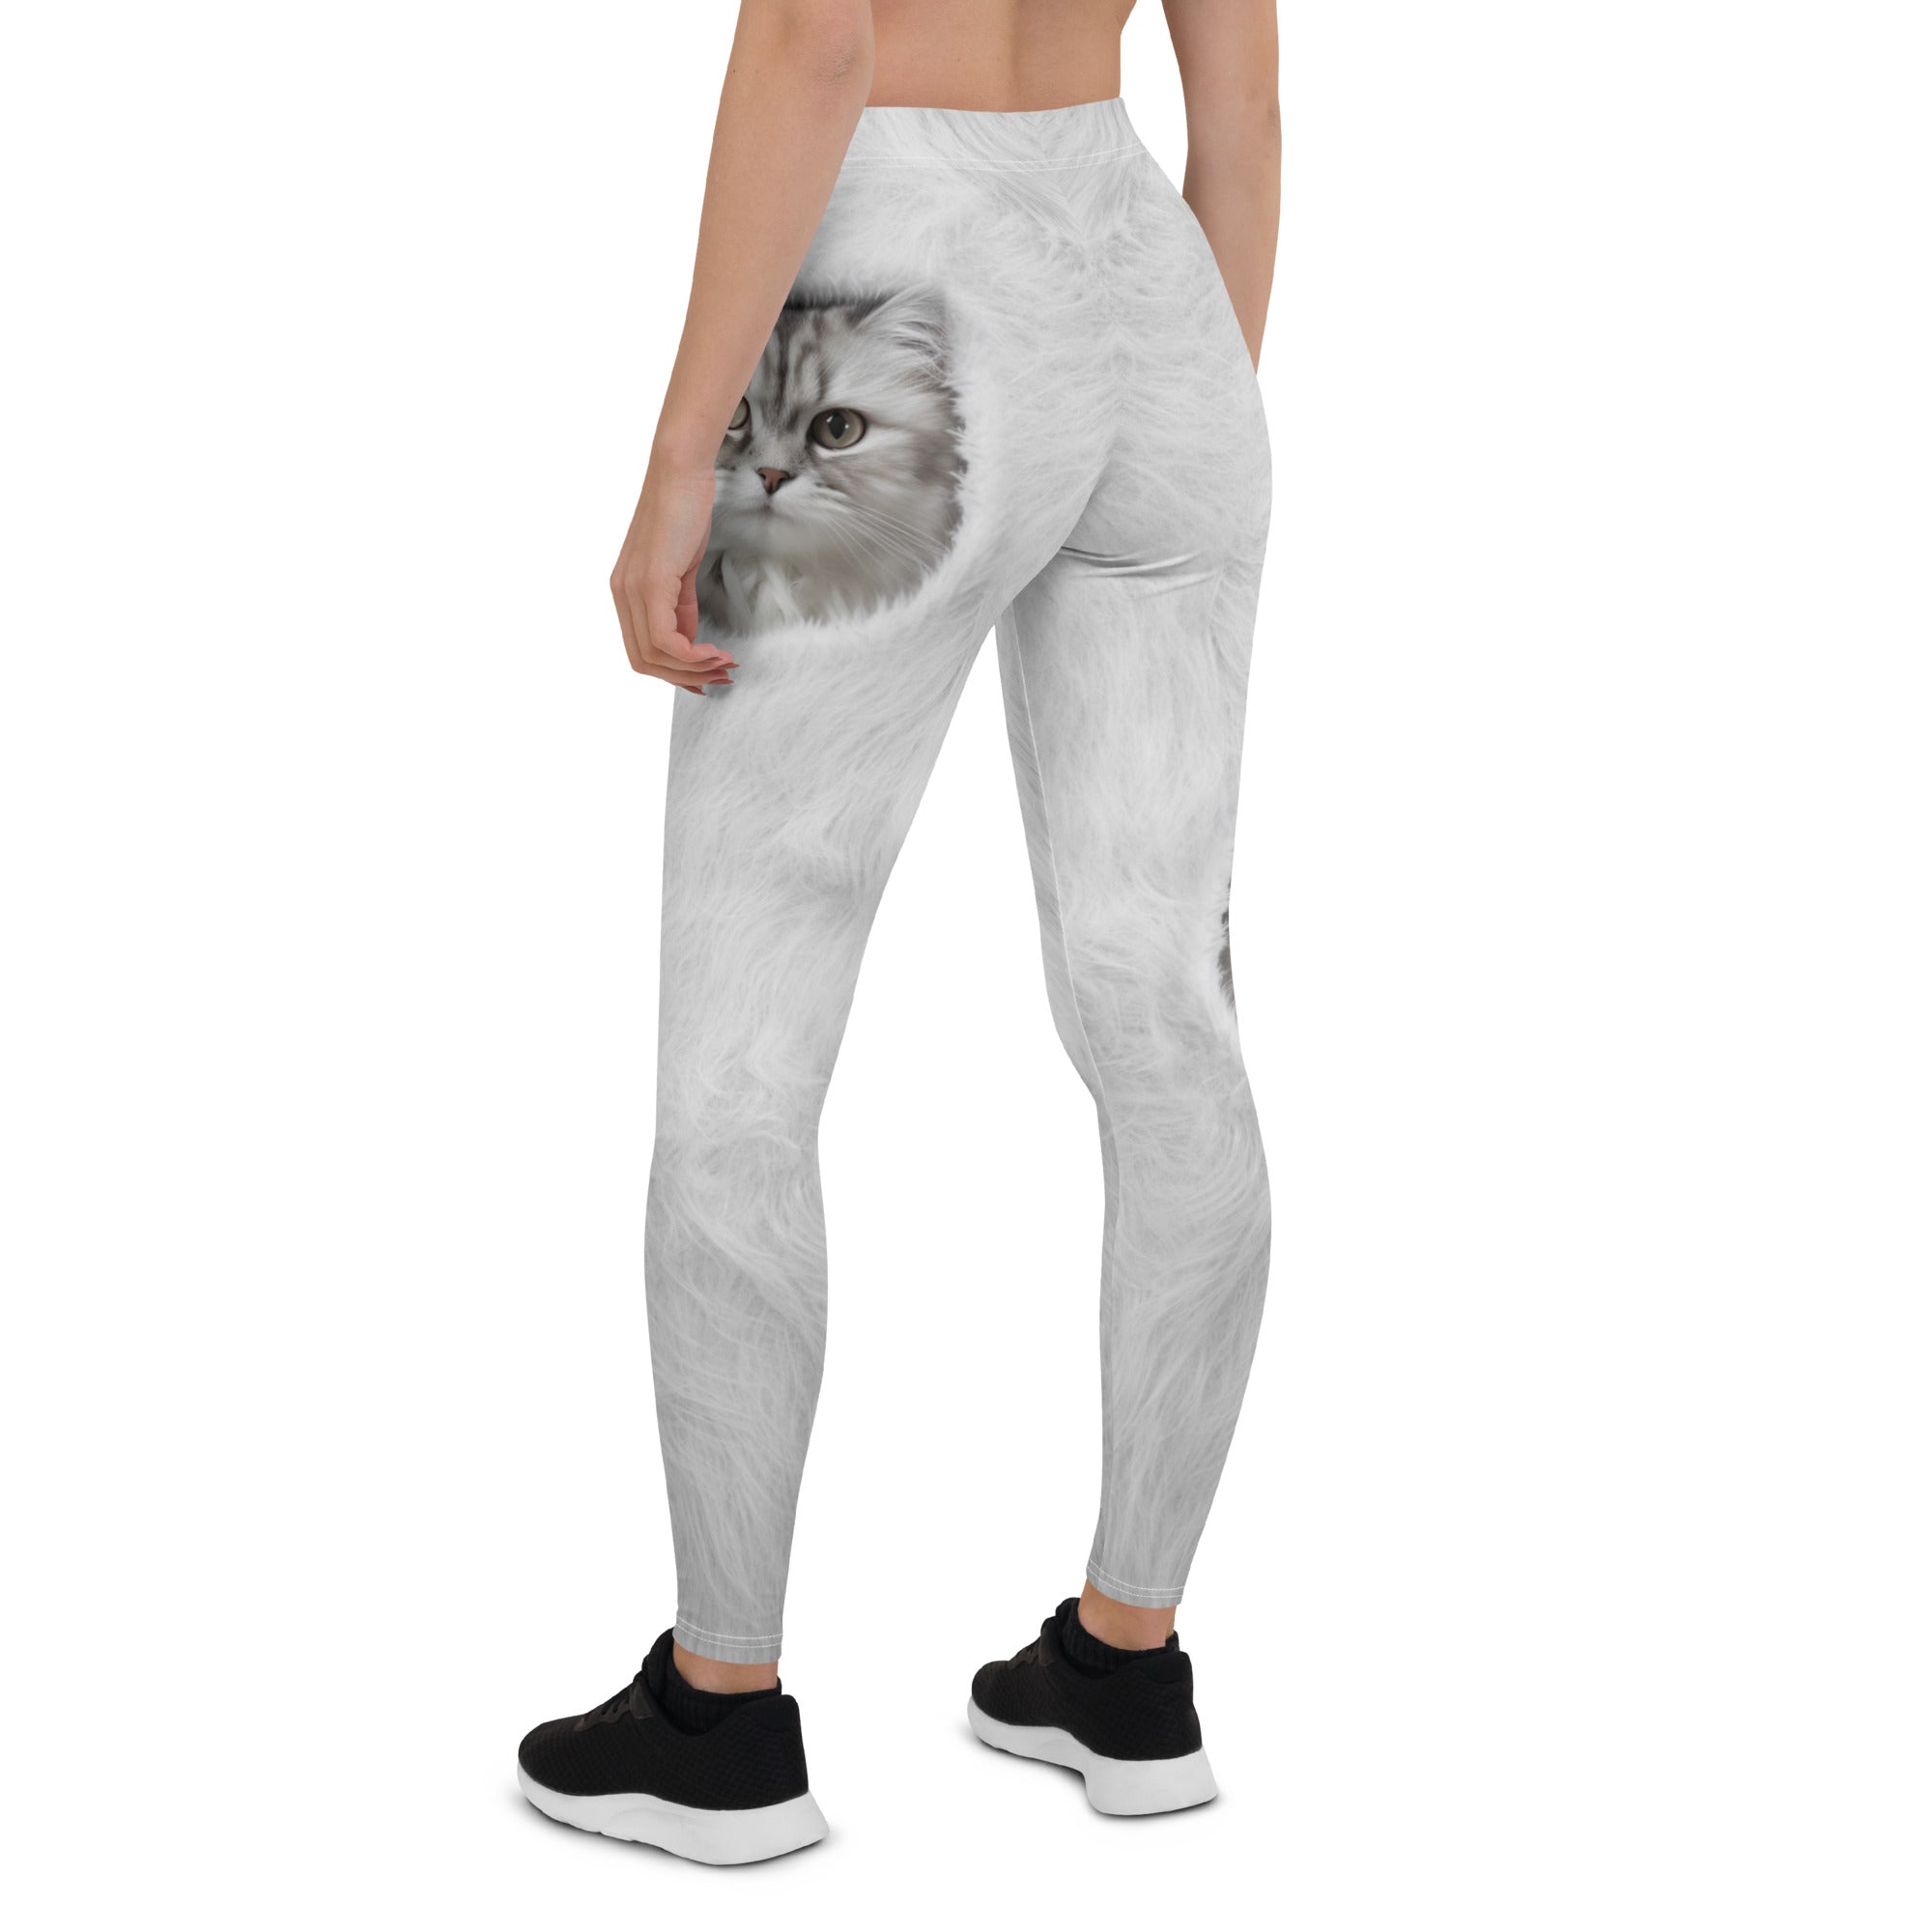 Cute Cat Leggings for Men – Found By Me - Everyday Clothing